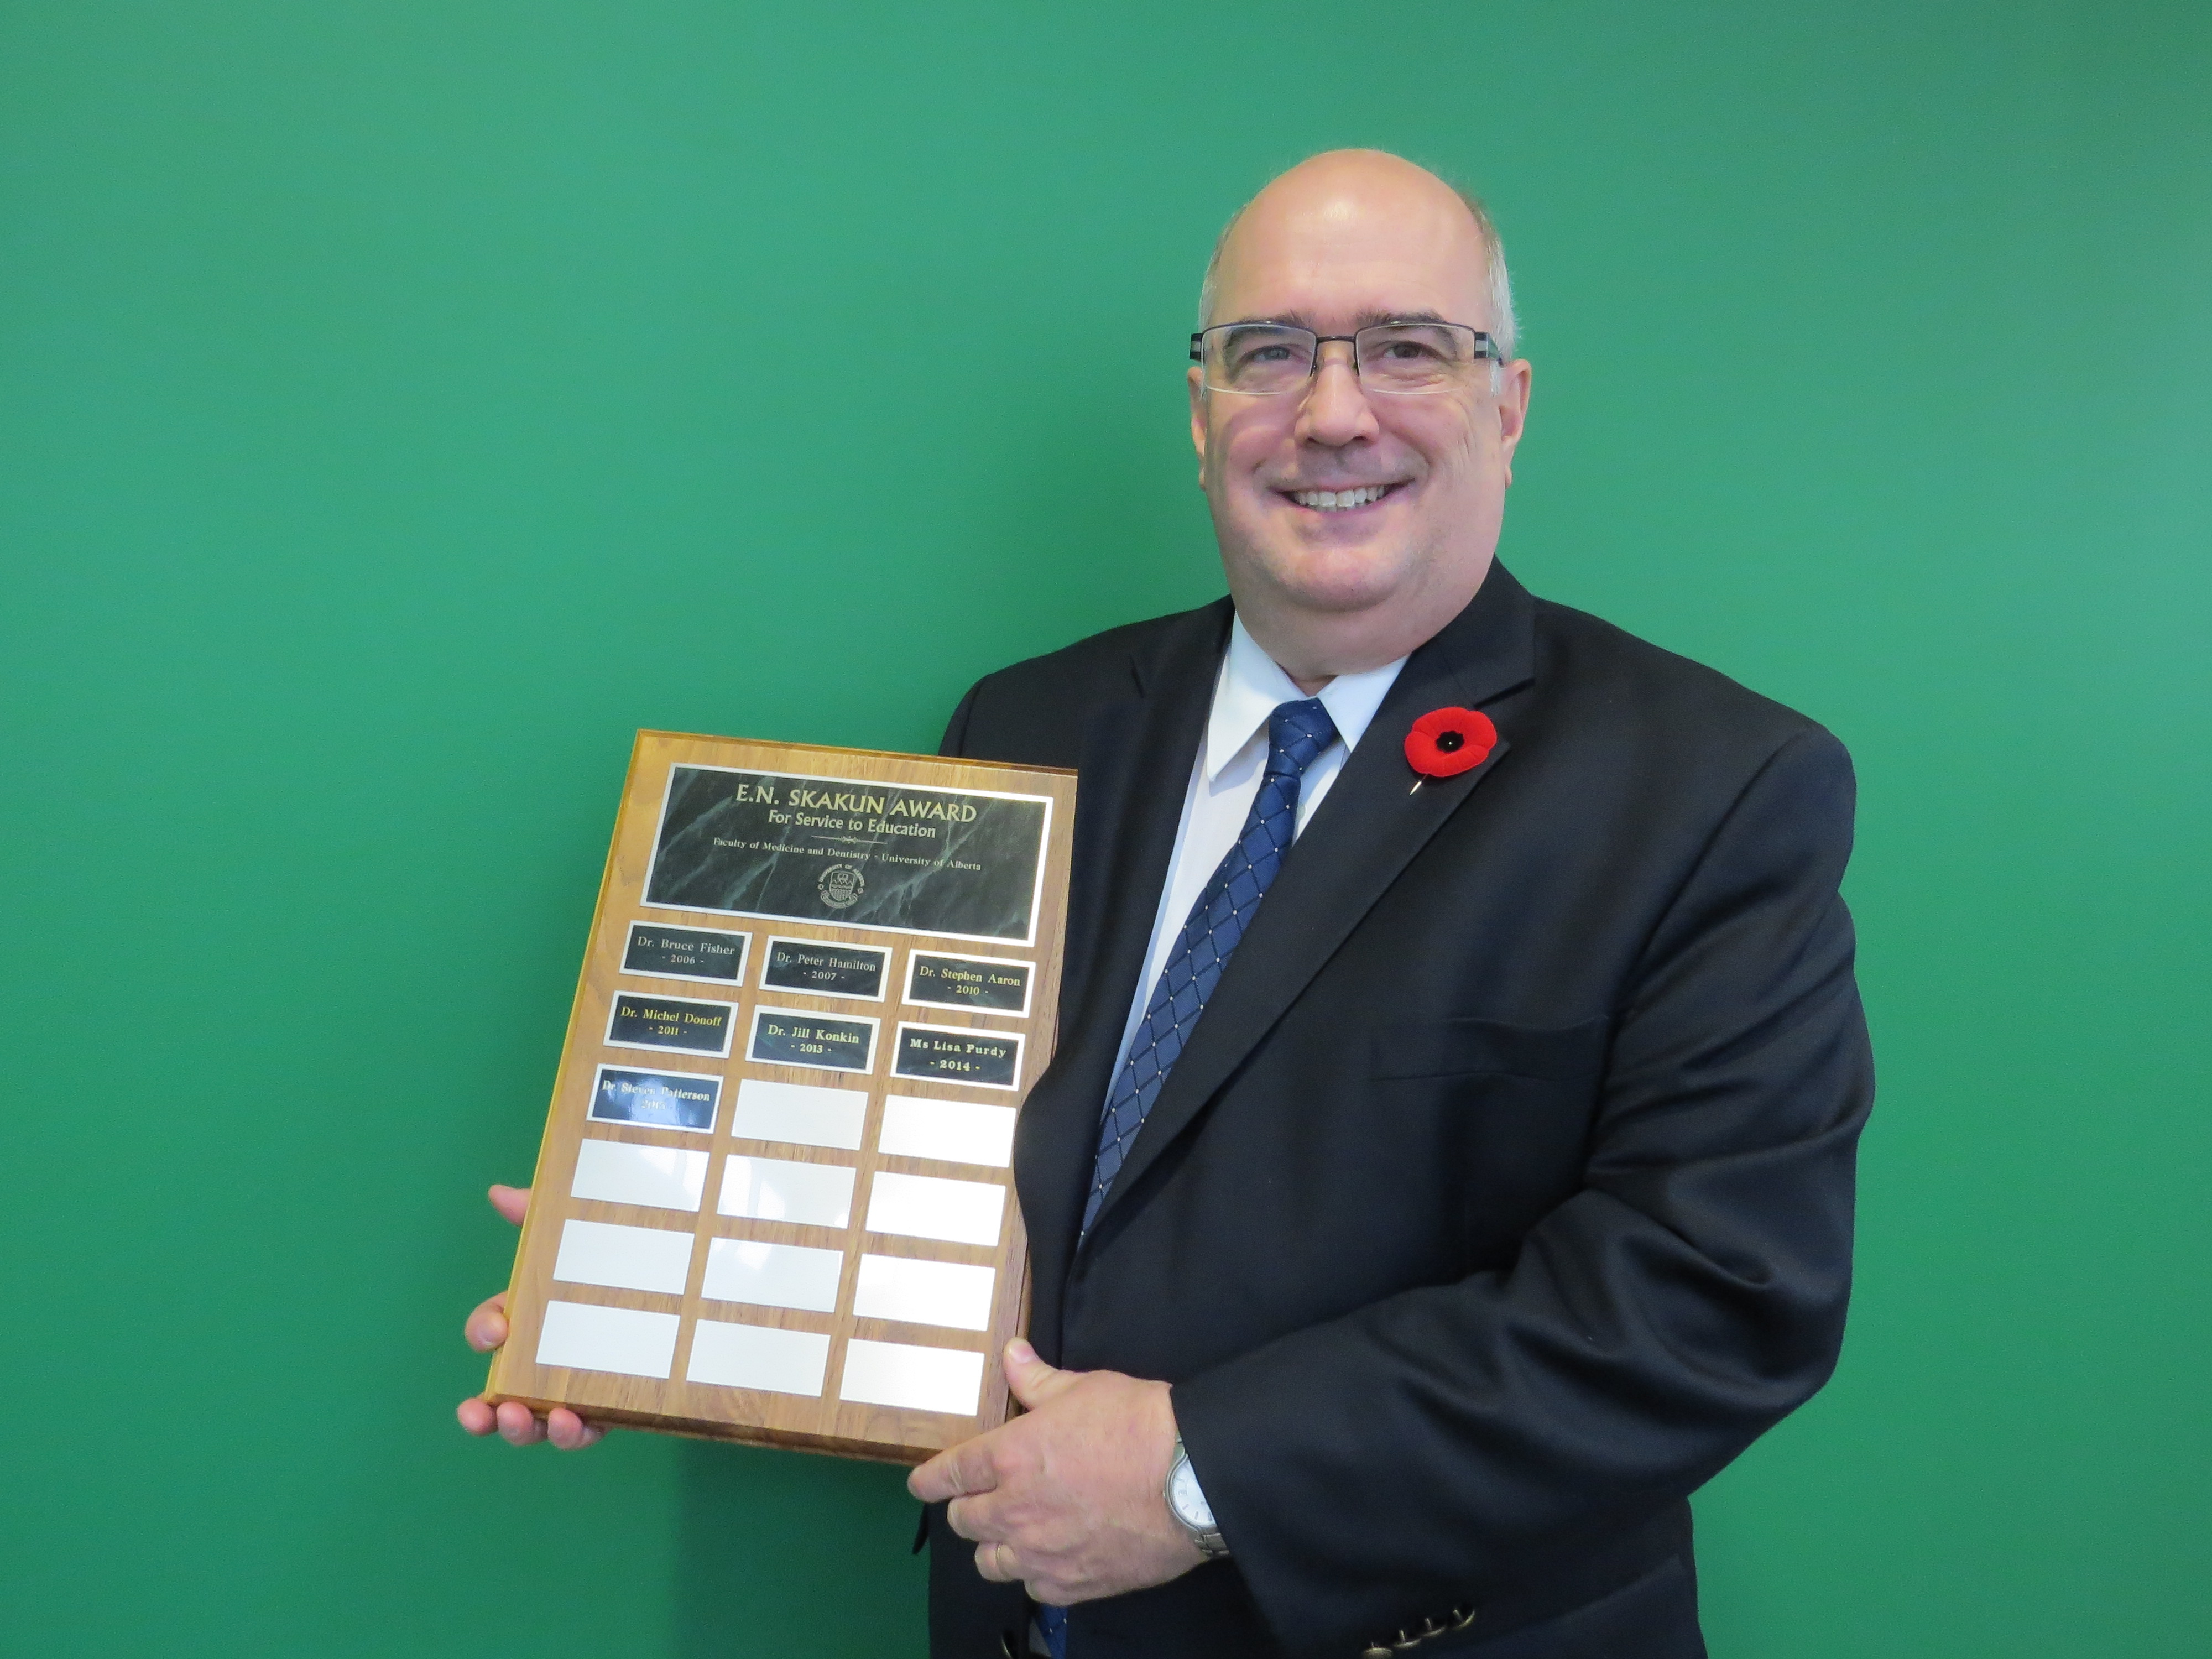 Steve Patterson is the recipient of the E.N. Skakun Award for Service to Education